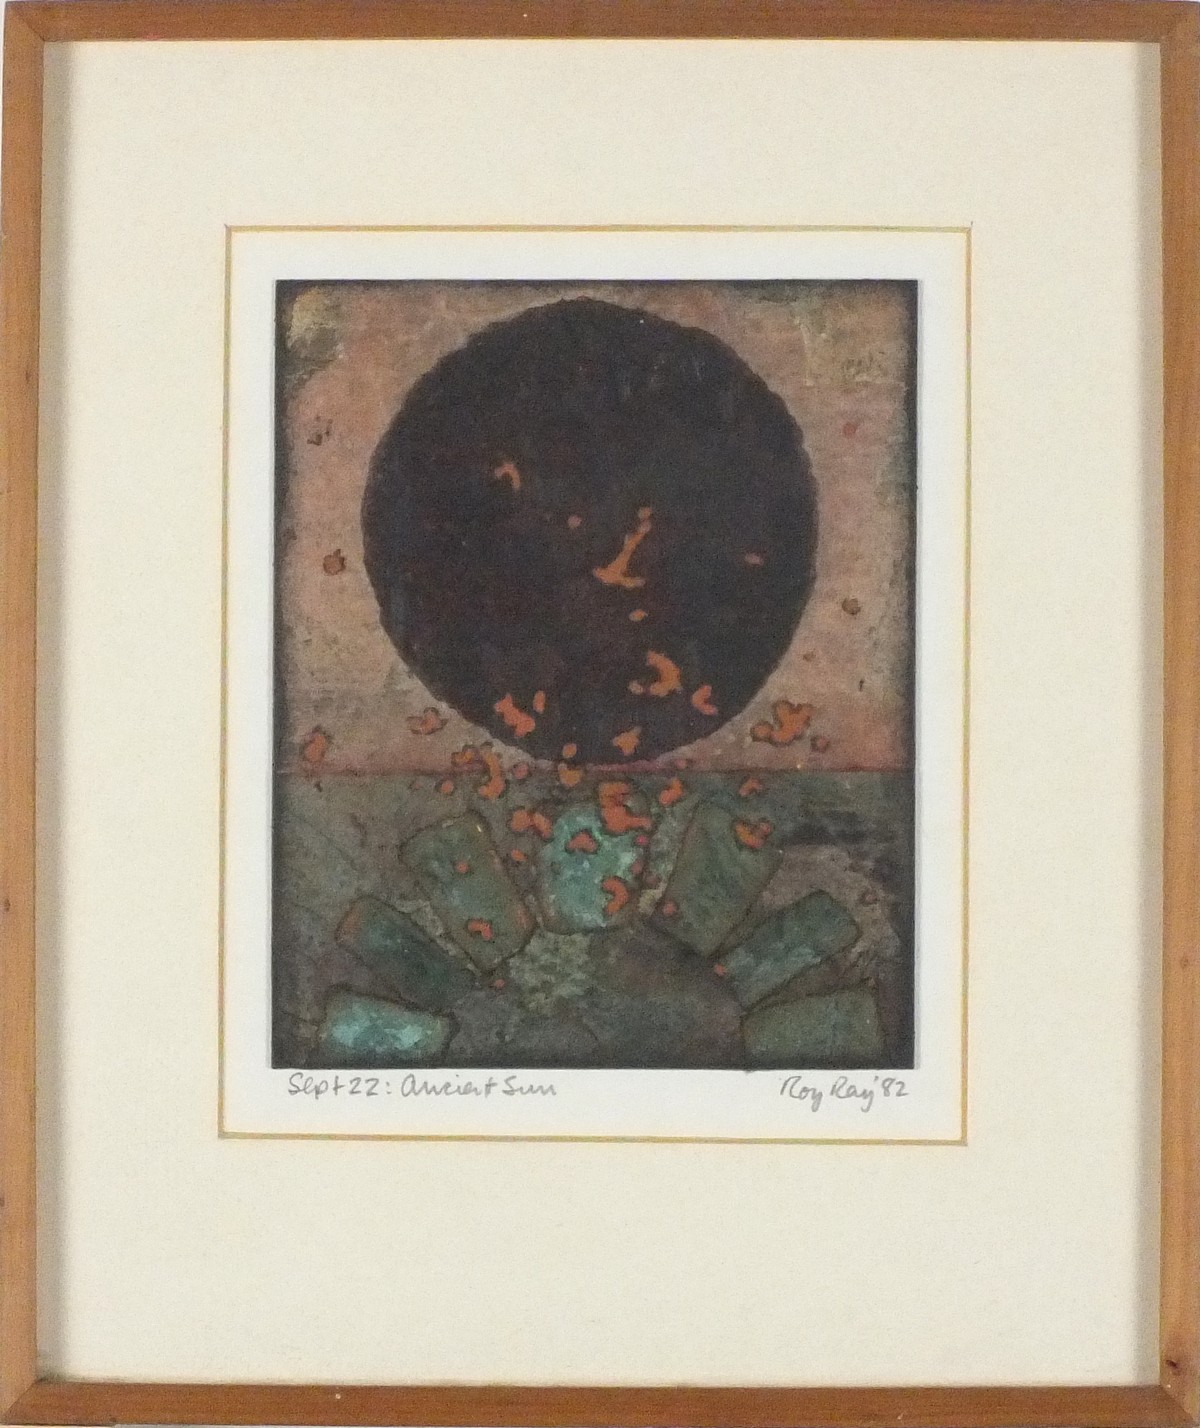 * Roy RAY (b.1936), Mixed media on board, 'Ancient Sun', Signed & dated Sept 22 (19)82, 6.75" x 5.5"